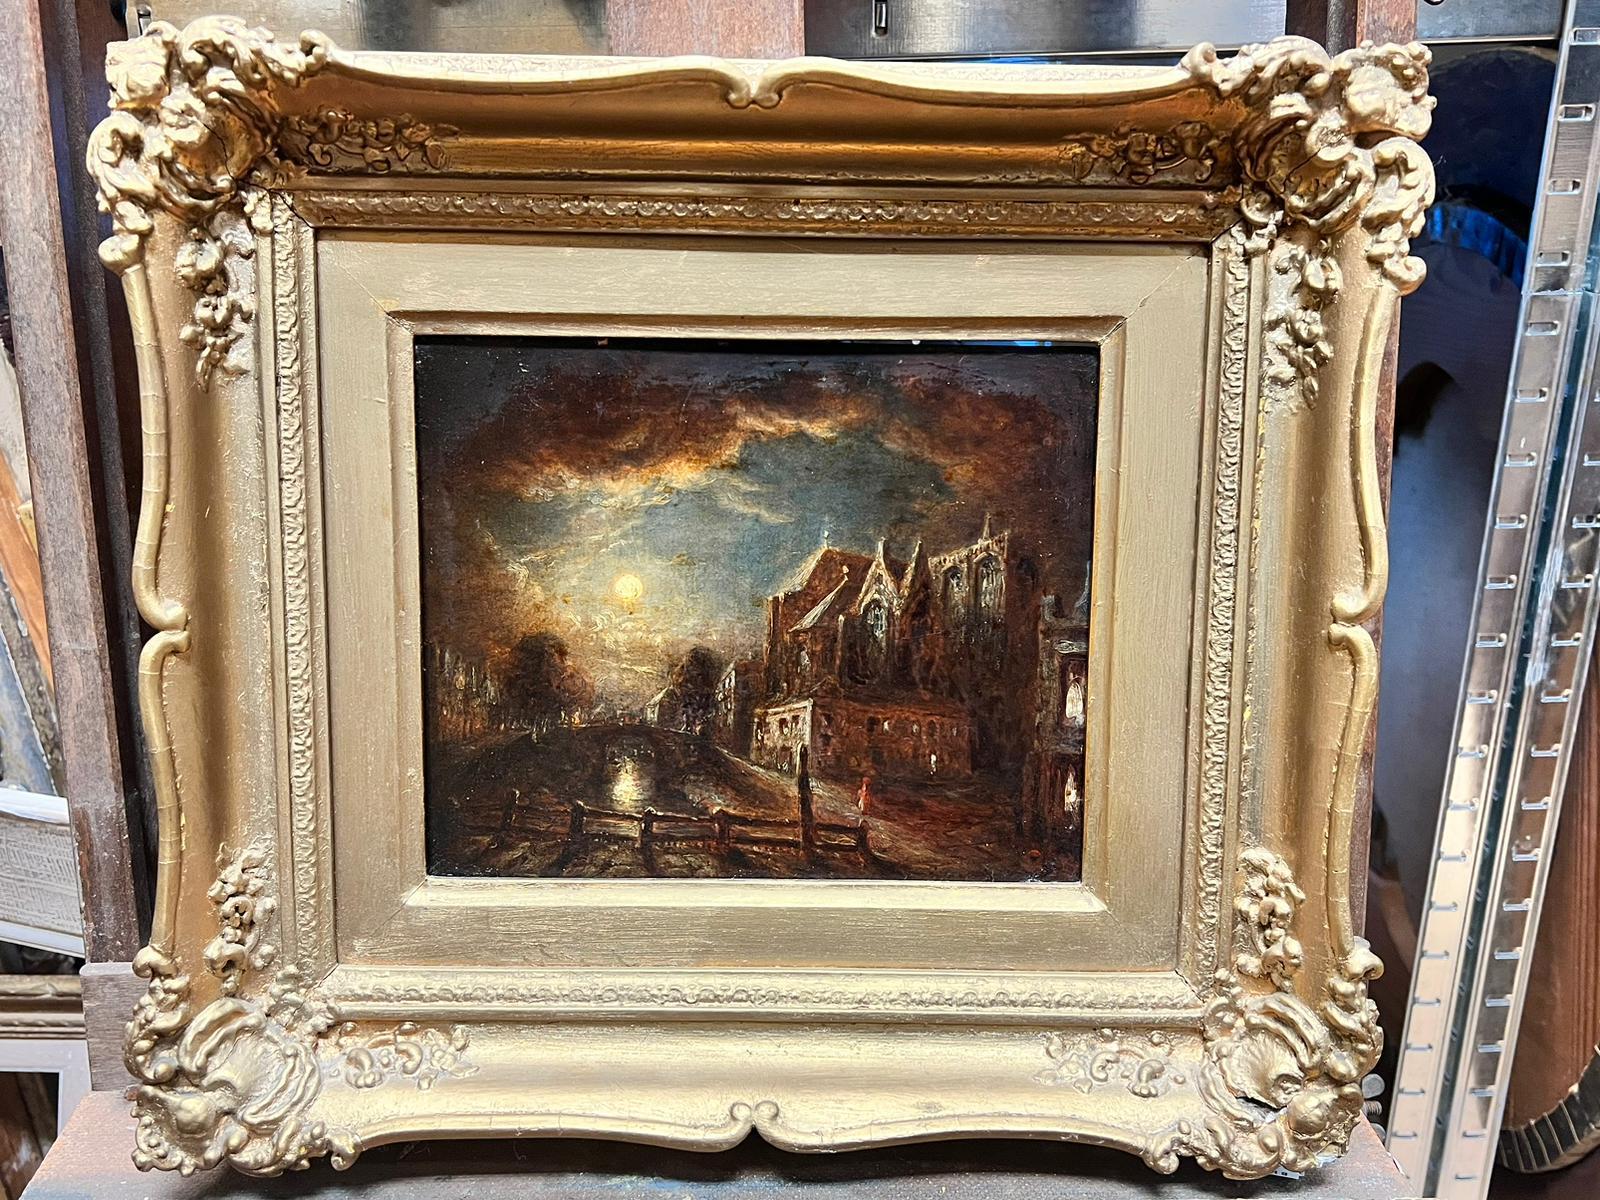 Antique Dutch School Moonlit Canal Scene With the Oute Kerk Amsterdram - Victorian Painting by 19th century Dutch School